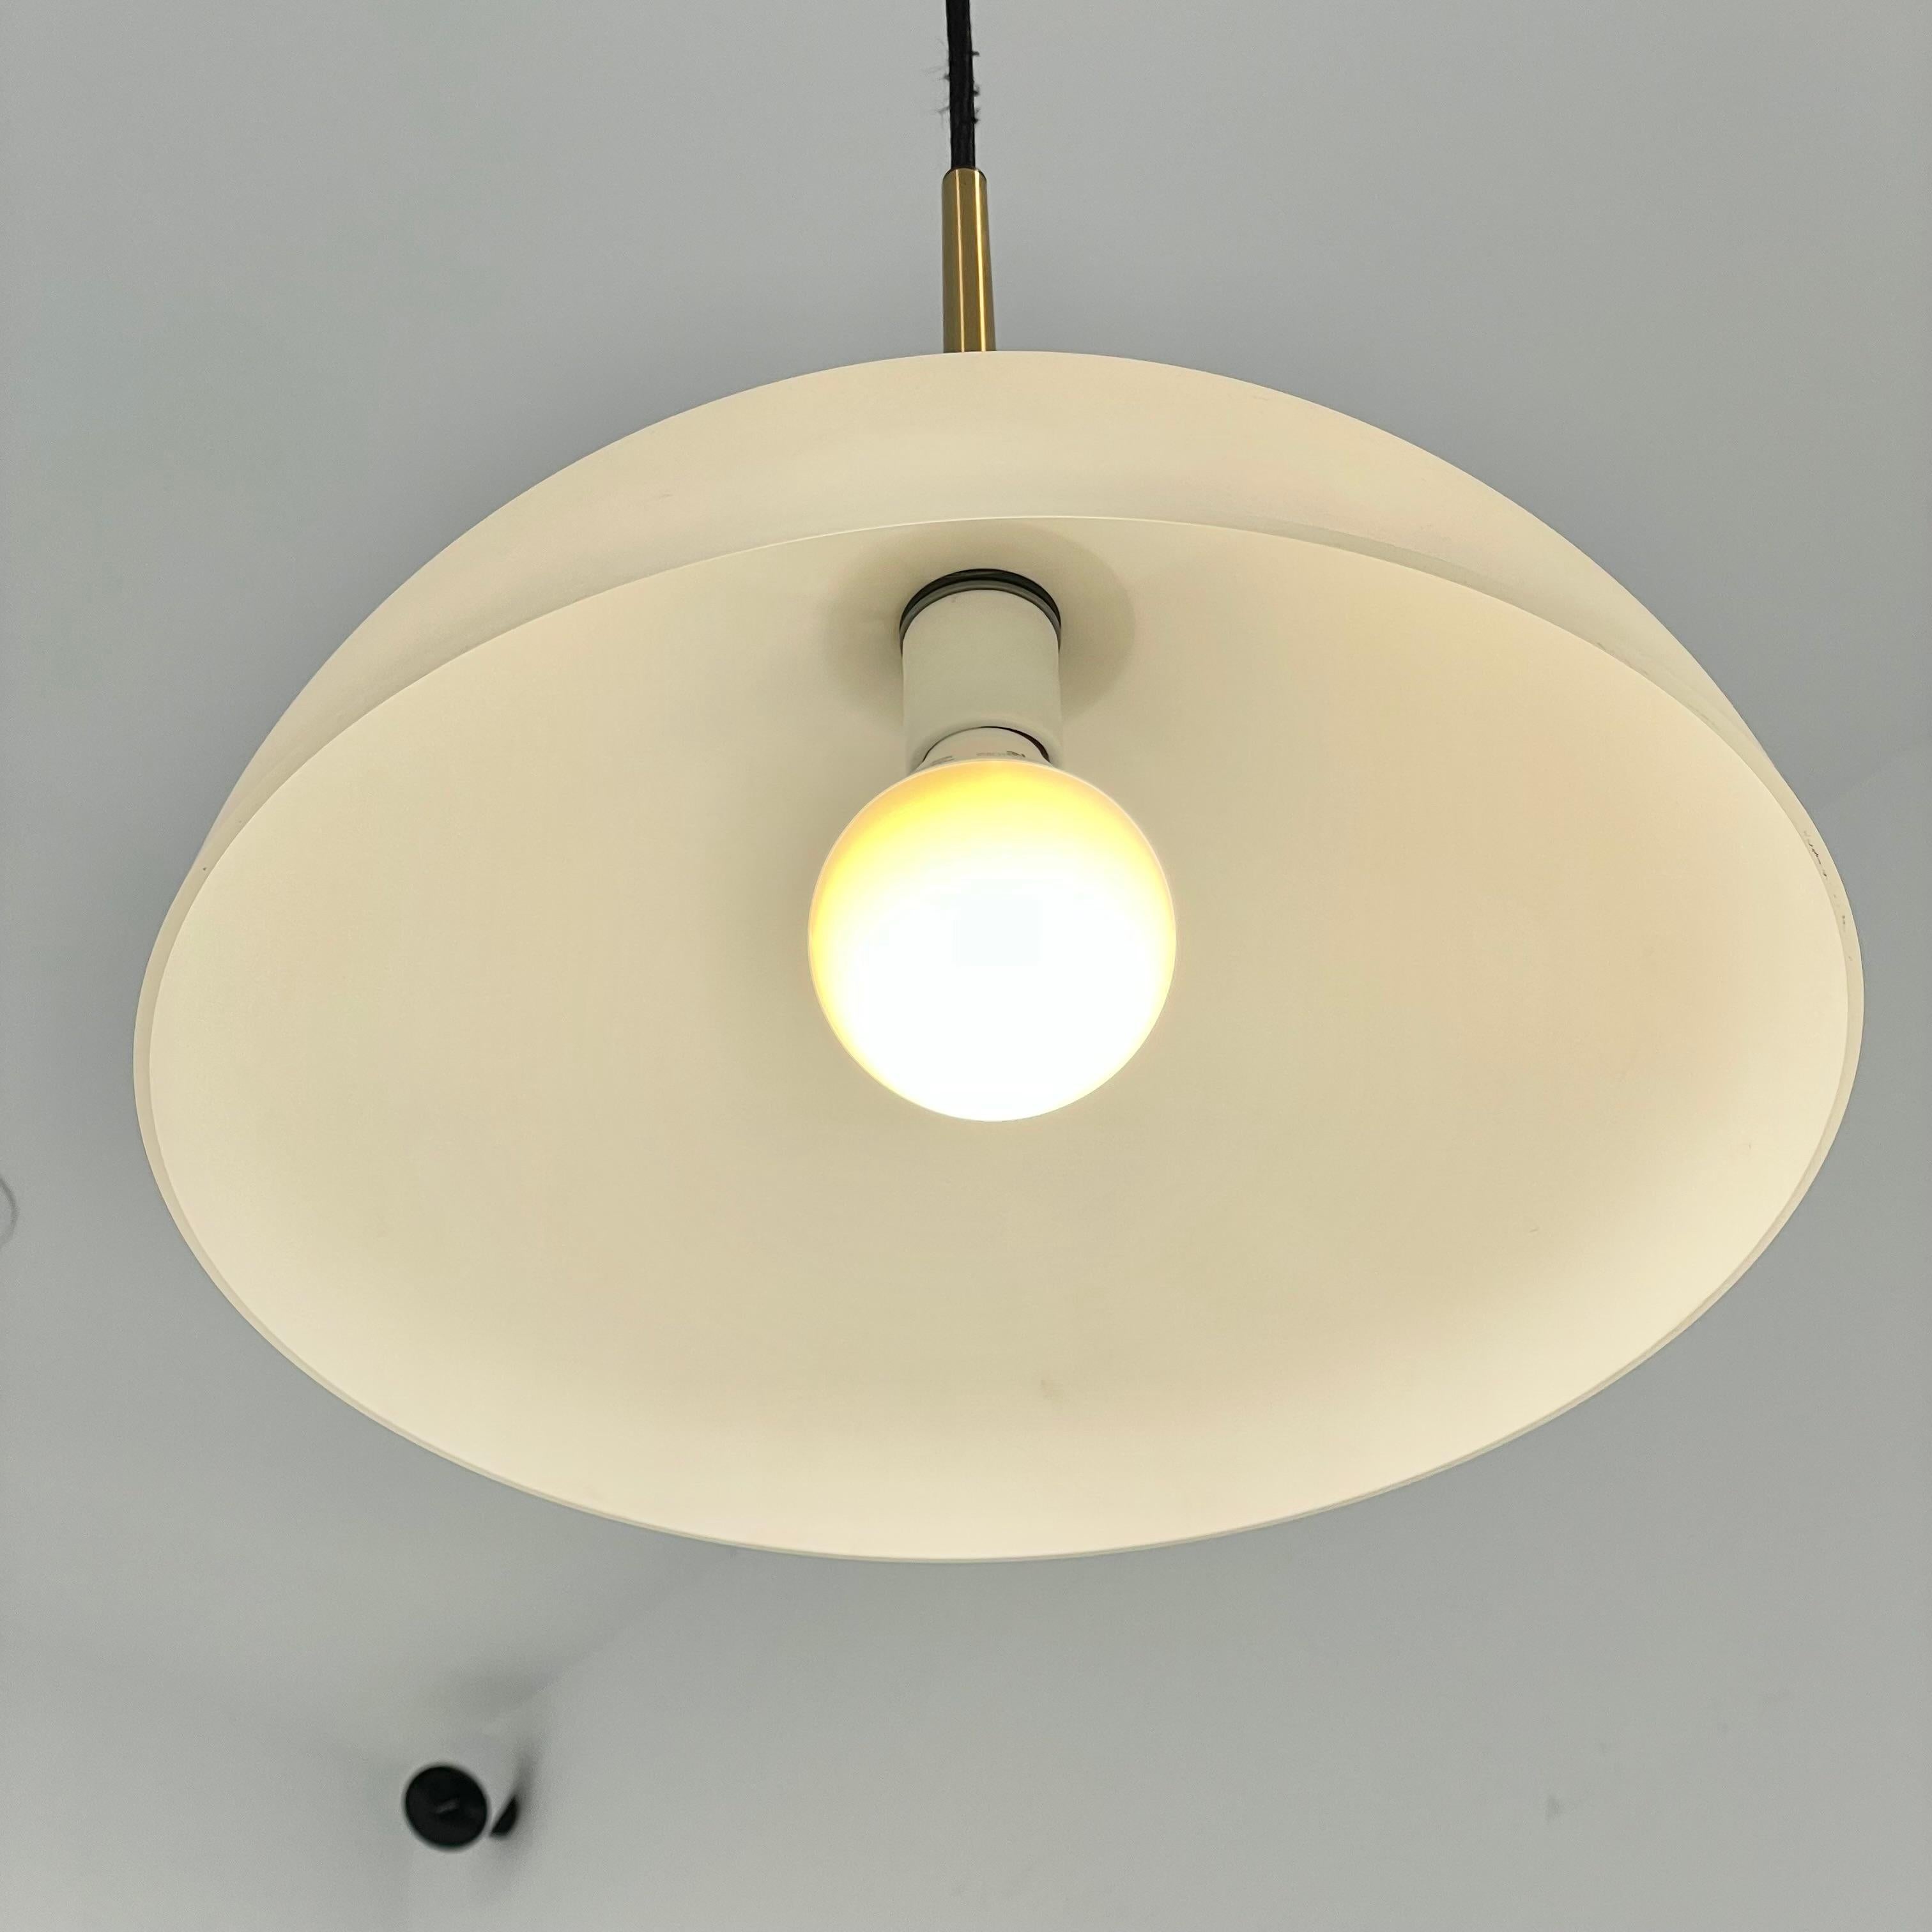 Florian Schulz Counter Balance Pendant with Frosted Glass Shade, 1970s Germany For Sale 6